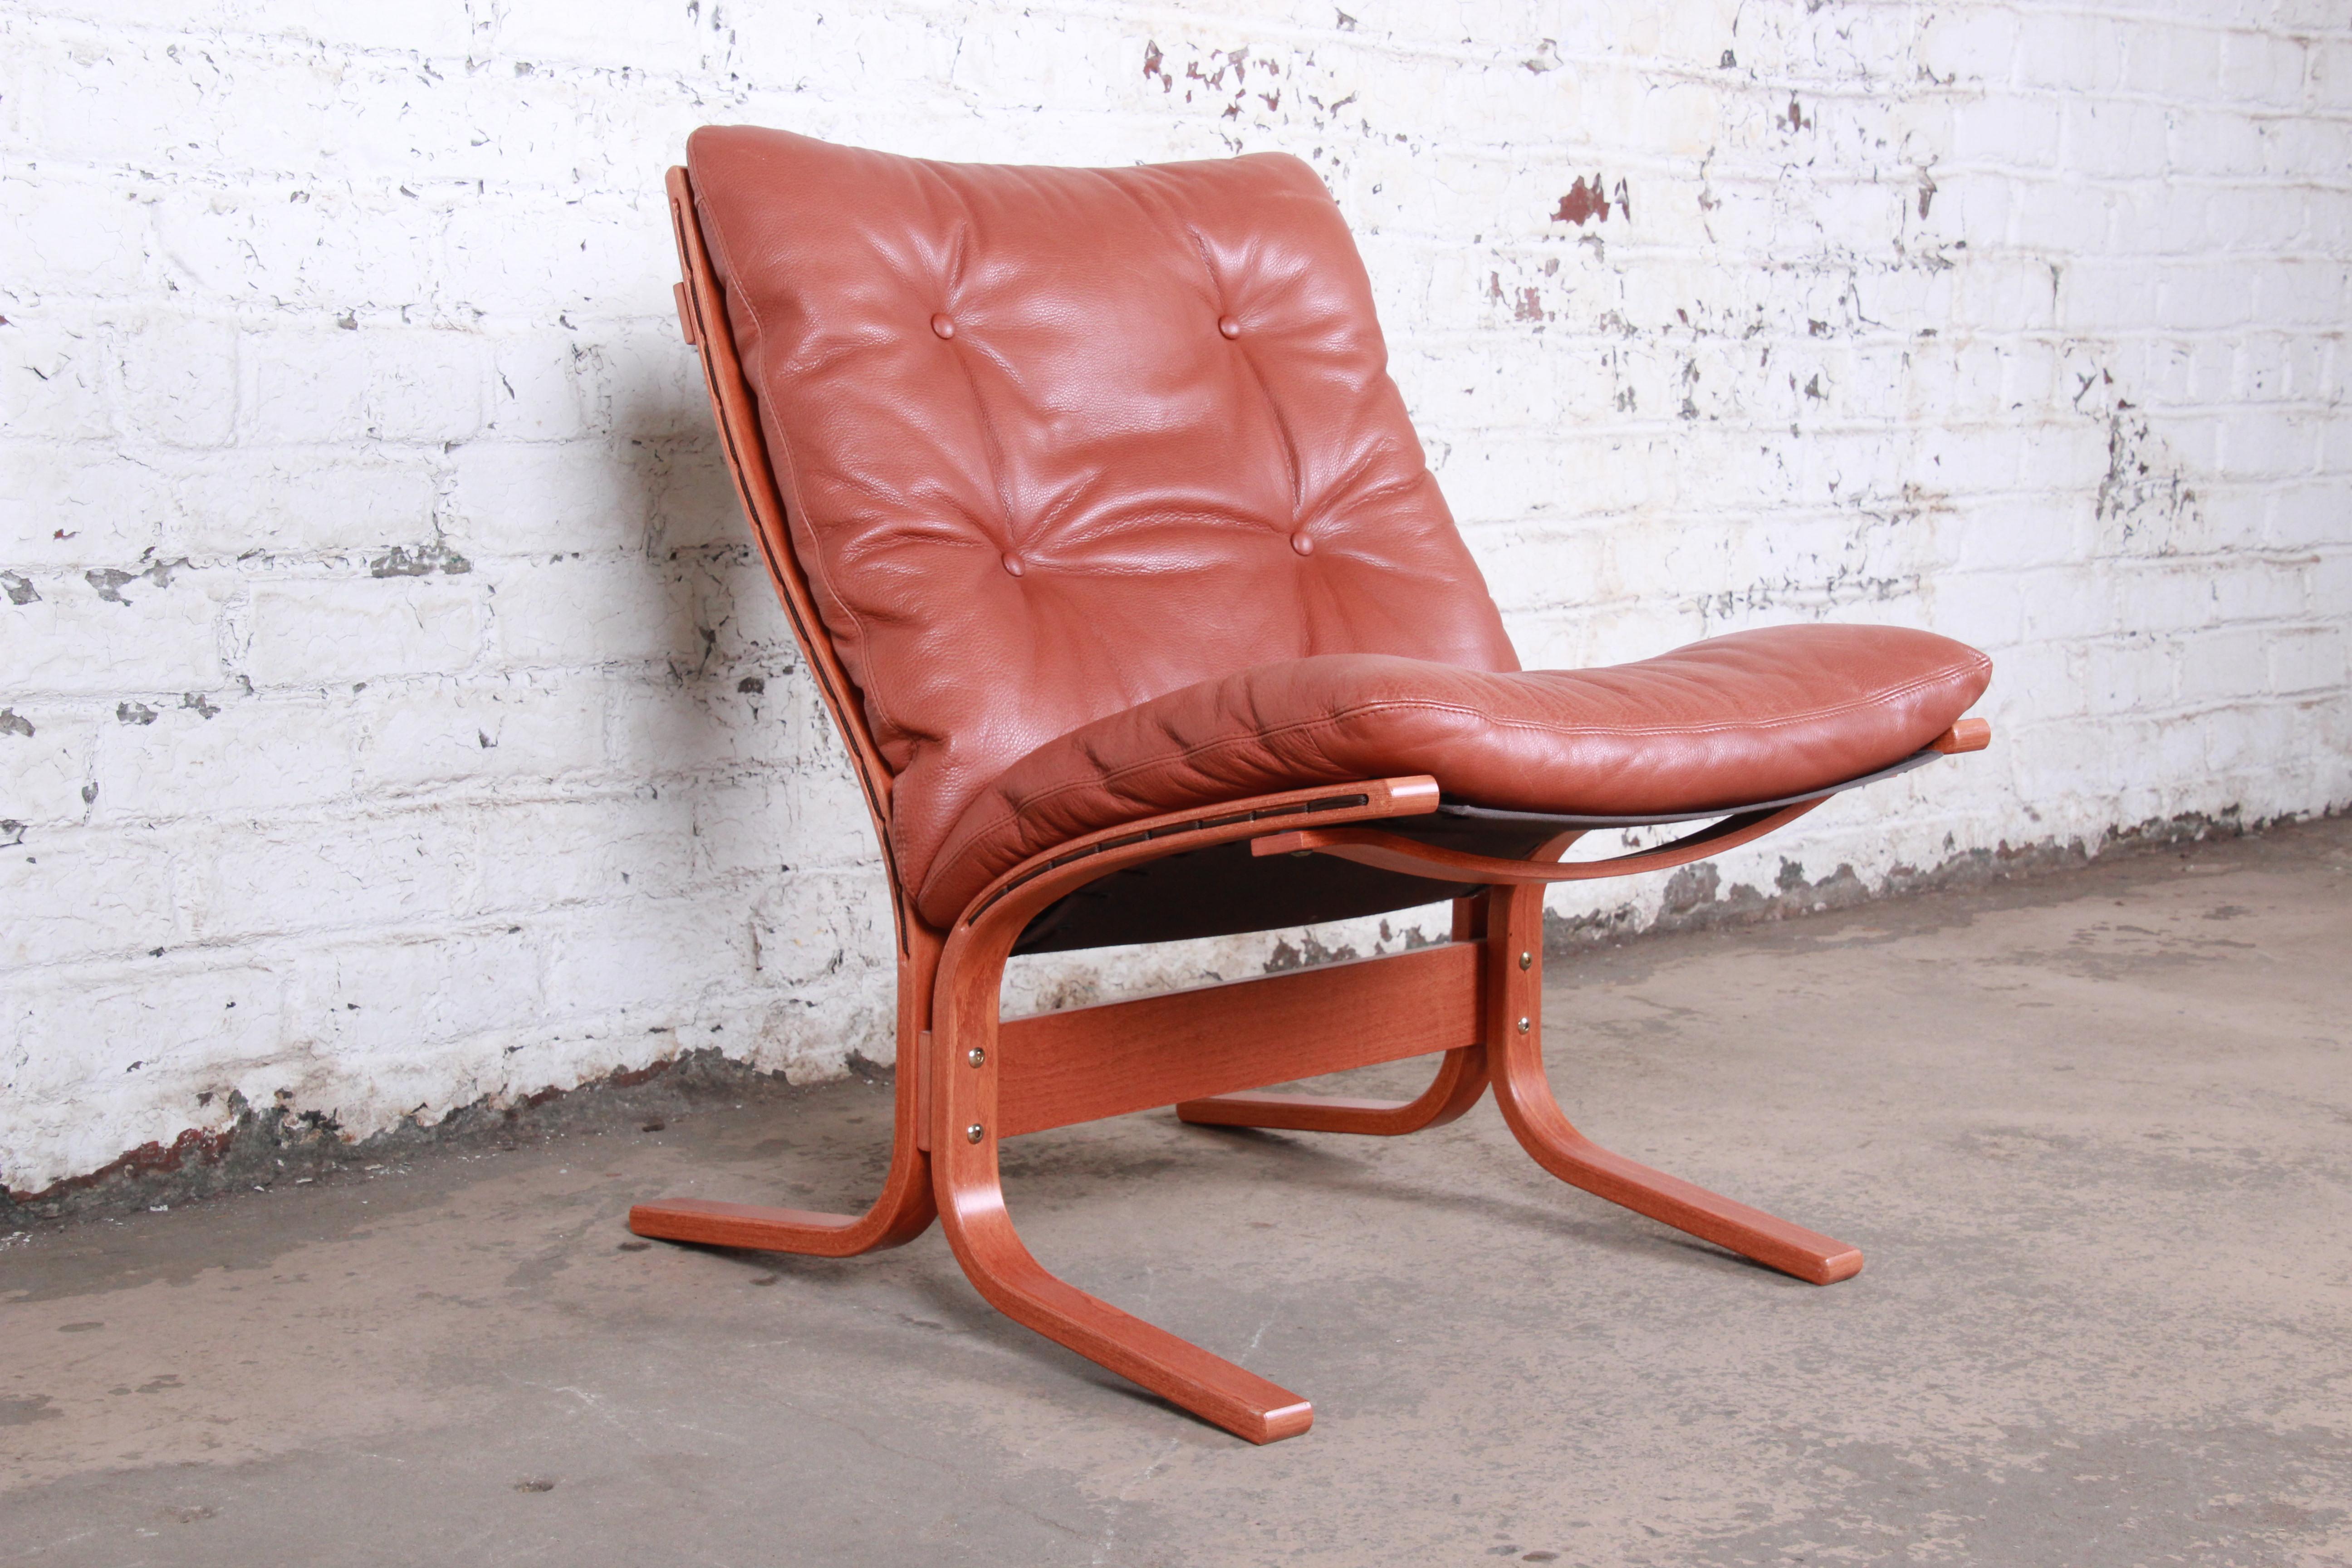 A sleek and stylish Minimalist Scandinavian Modern bentwood teak and cognac leather lounge chair

By Ingmar Relling for Westnofa Furniture

Norway, circa 1960s

Measures: 26